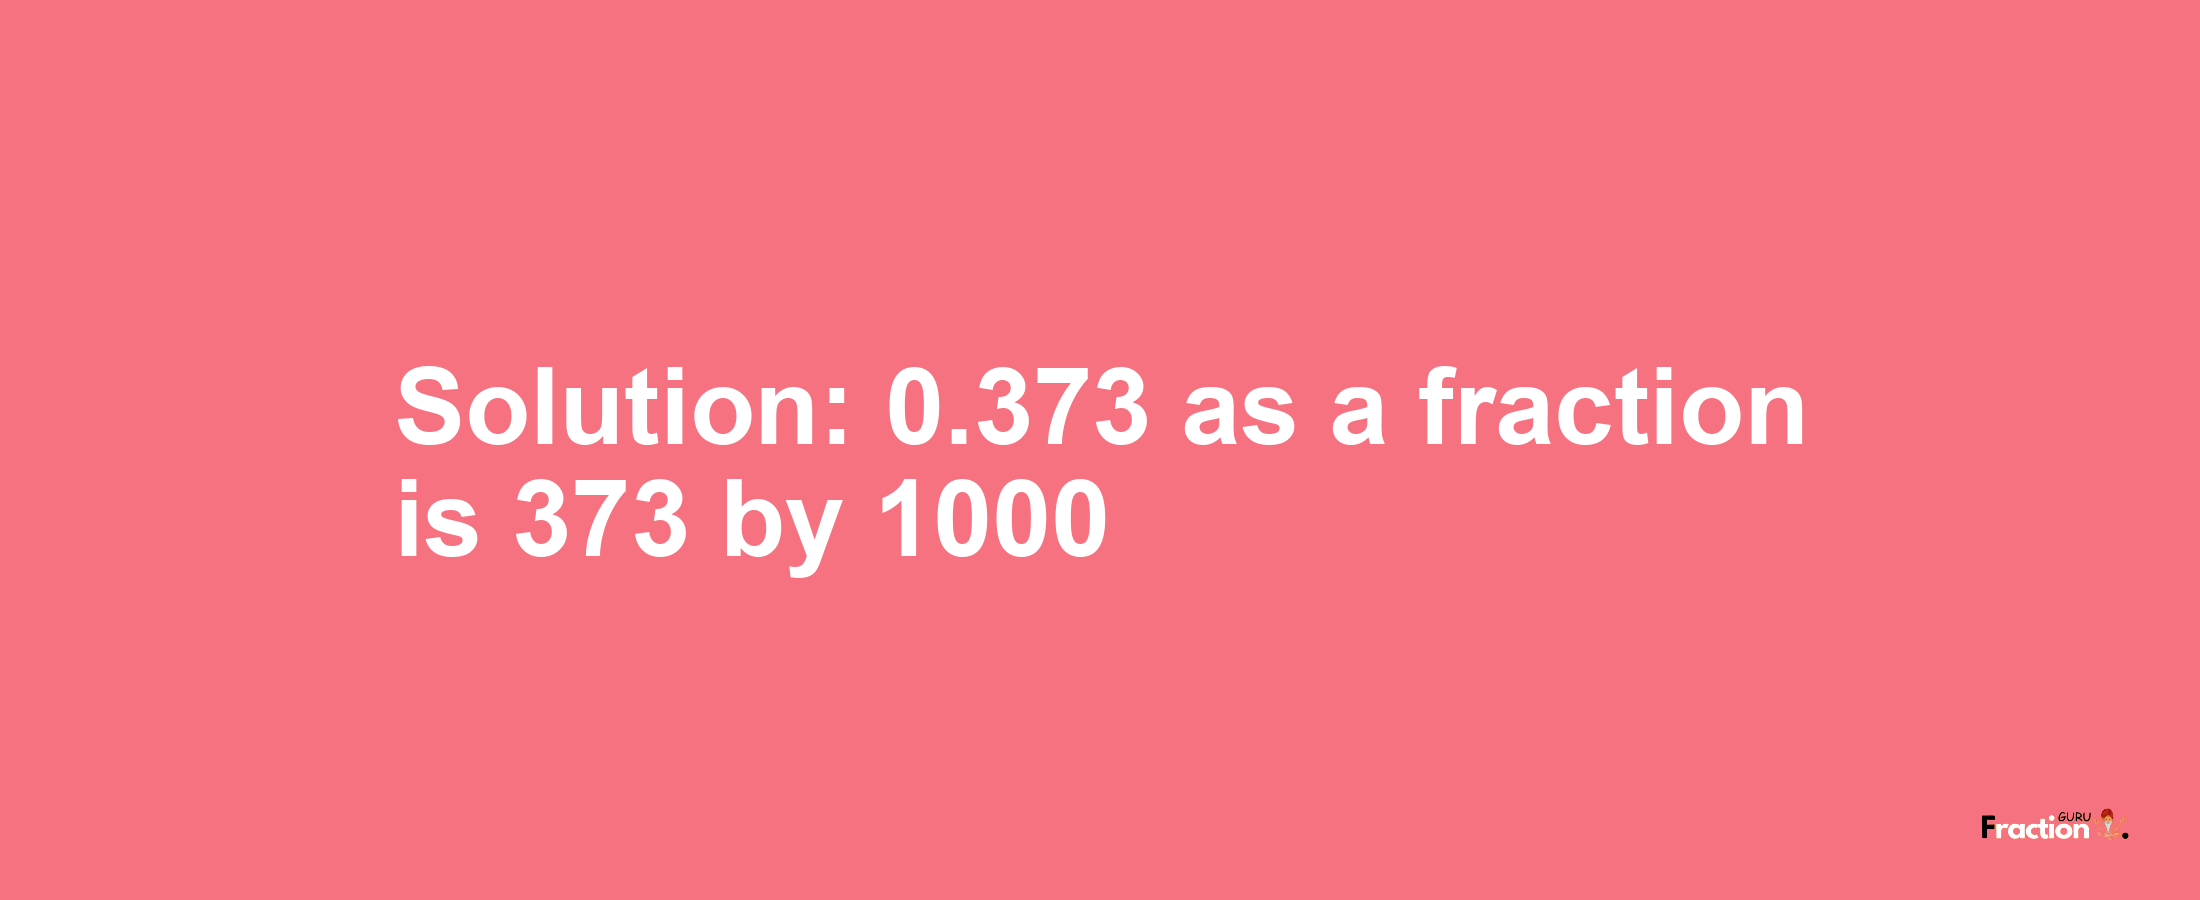 Solution:0.373 as a fraction is 373/1000